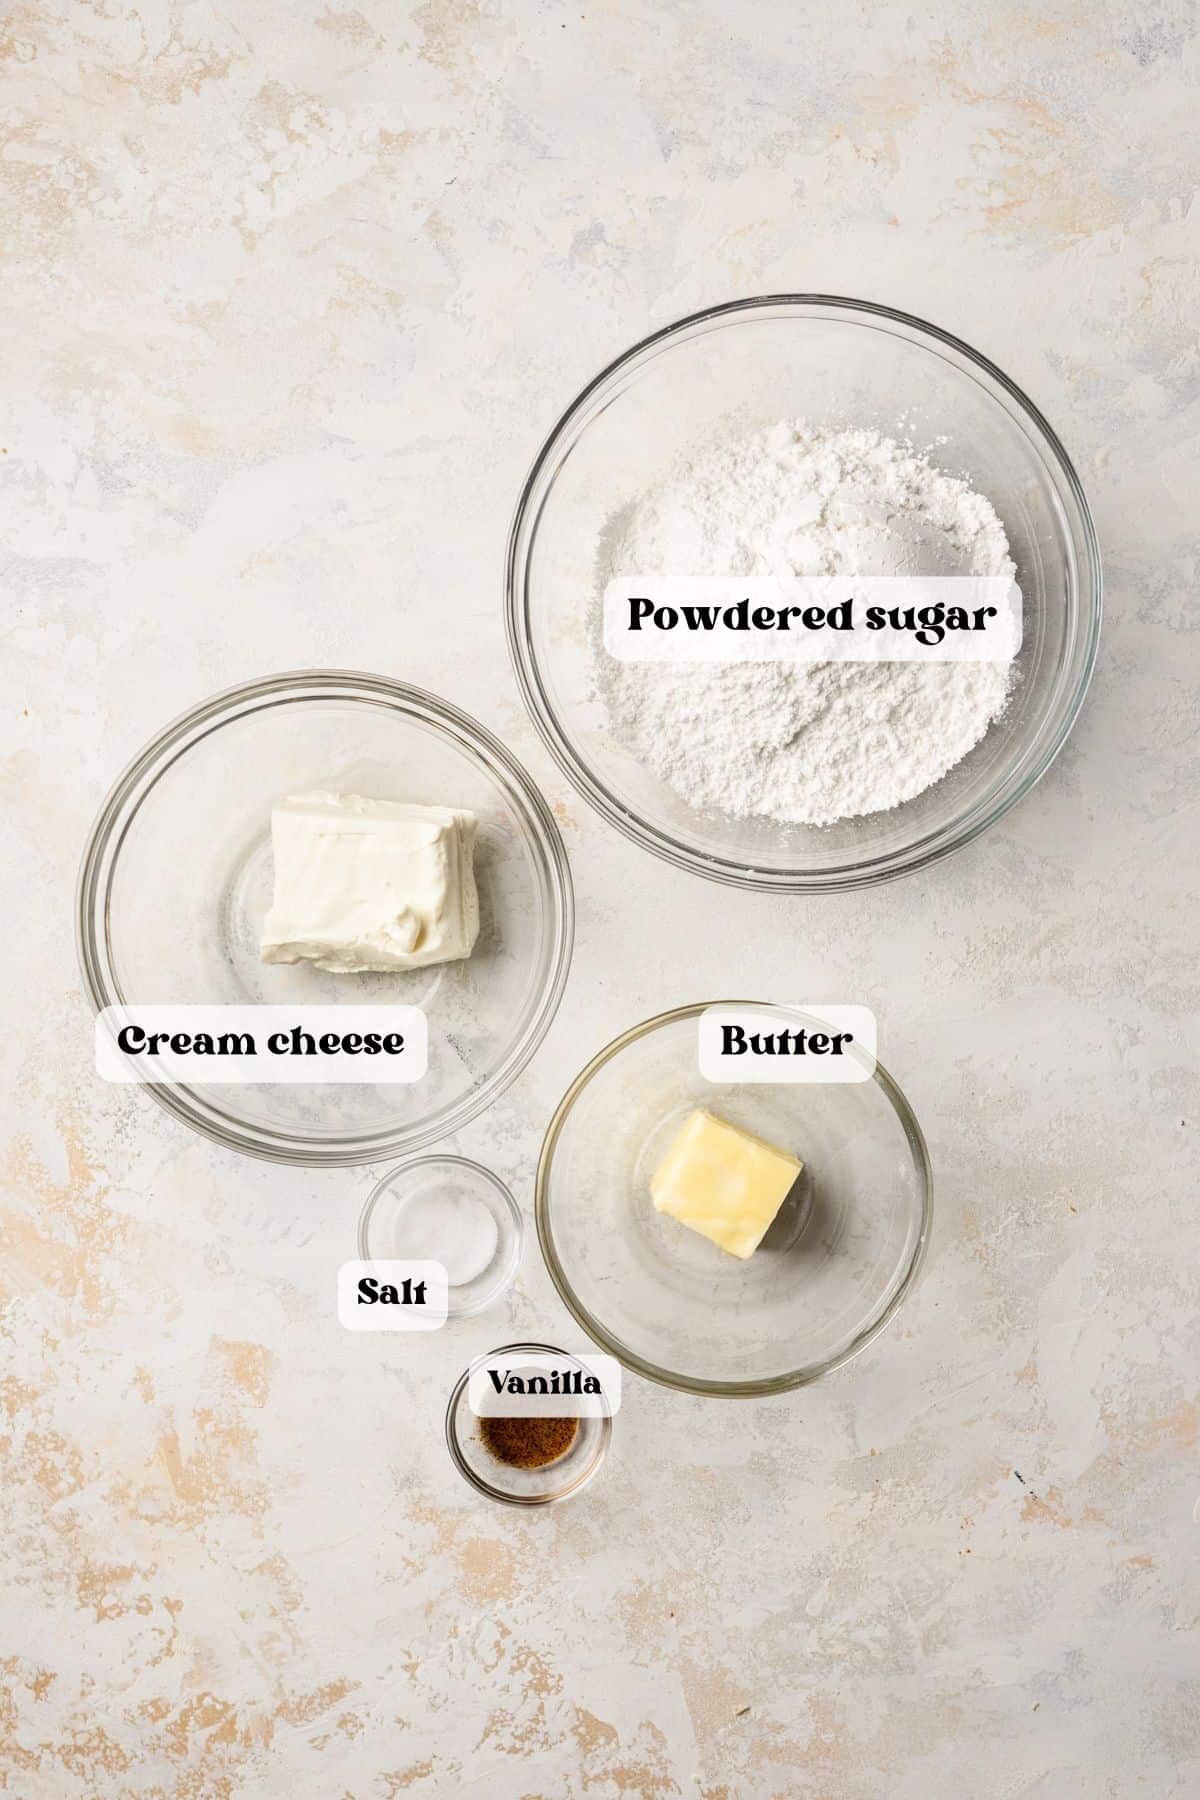 Ingredients for cream cheese frosting on a white surface.